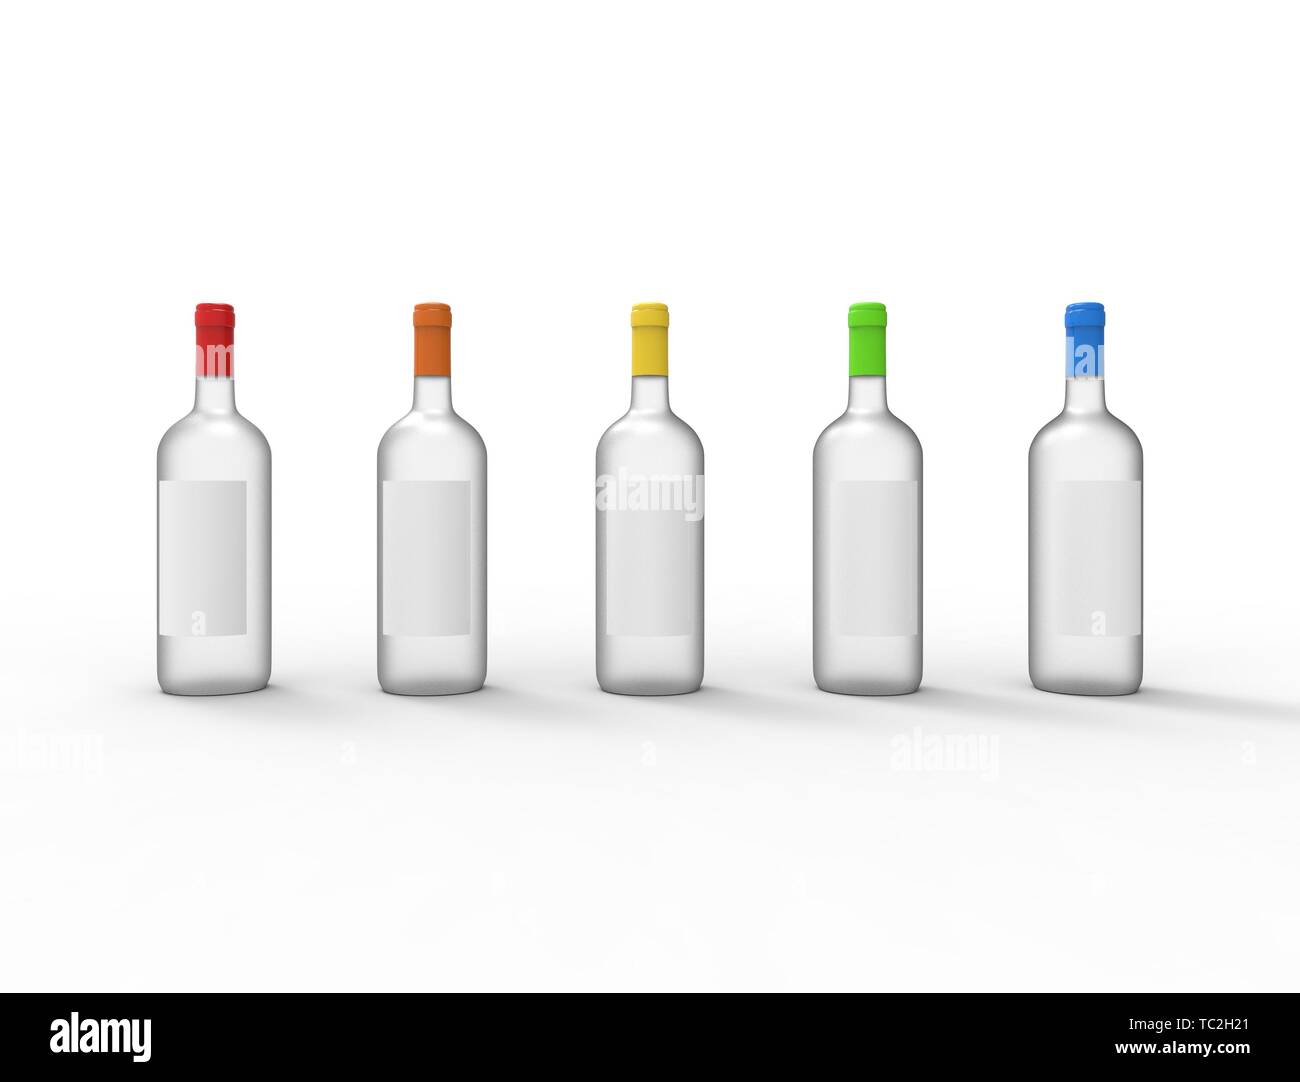 3D rendering of a glass bottle isolated on white background. Stock Photo